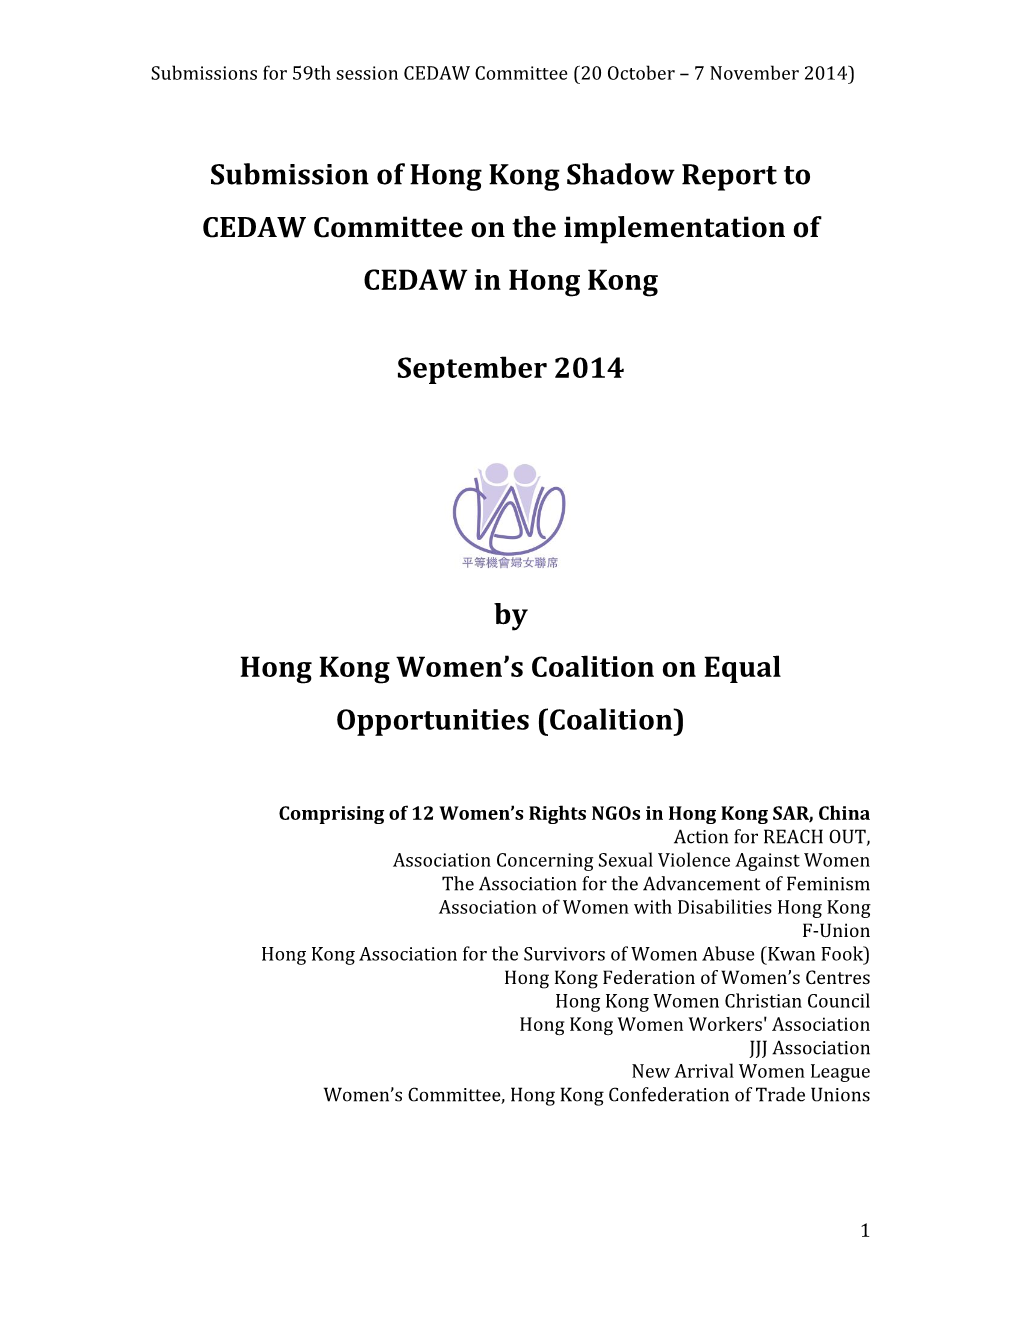 Submission of Hong Kong Shadow Report to CEDAW Committee on the Implementation of CEDAW in Hong Kong